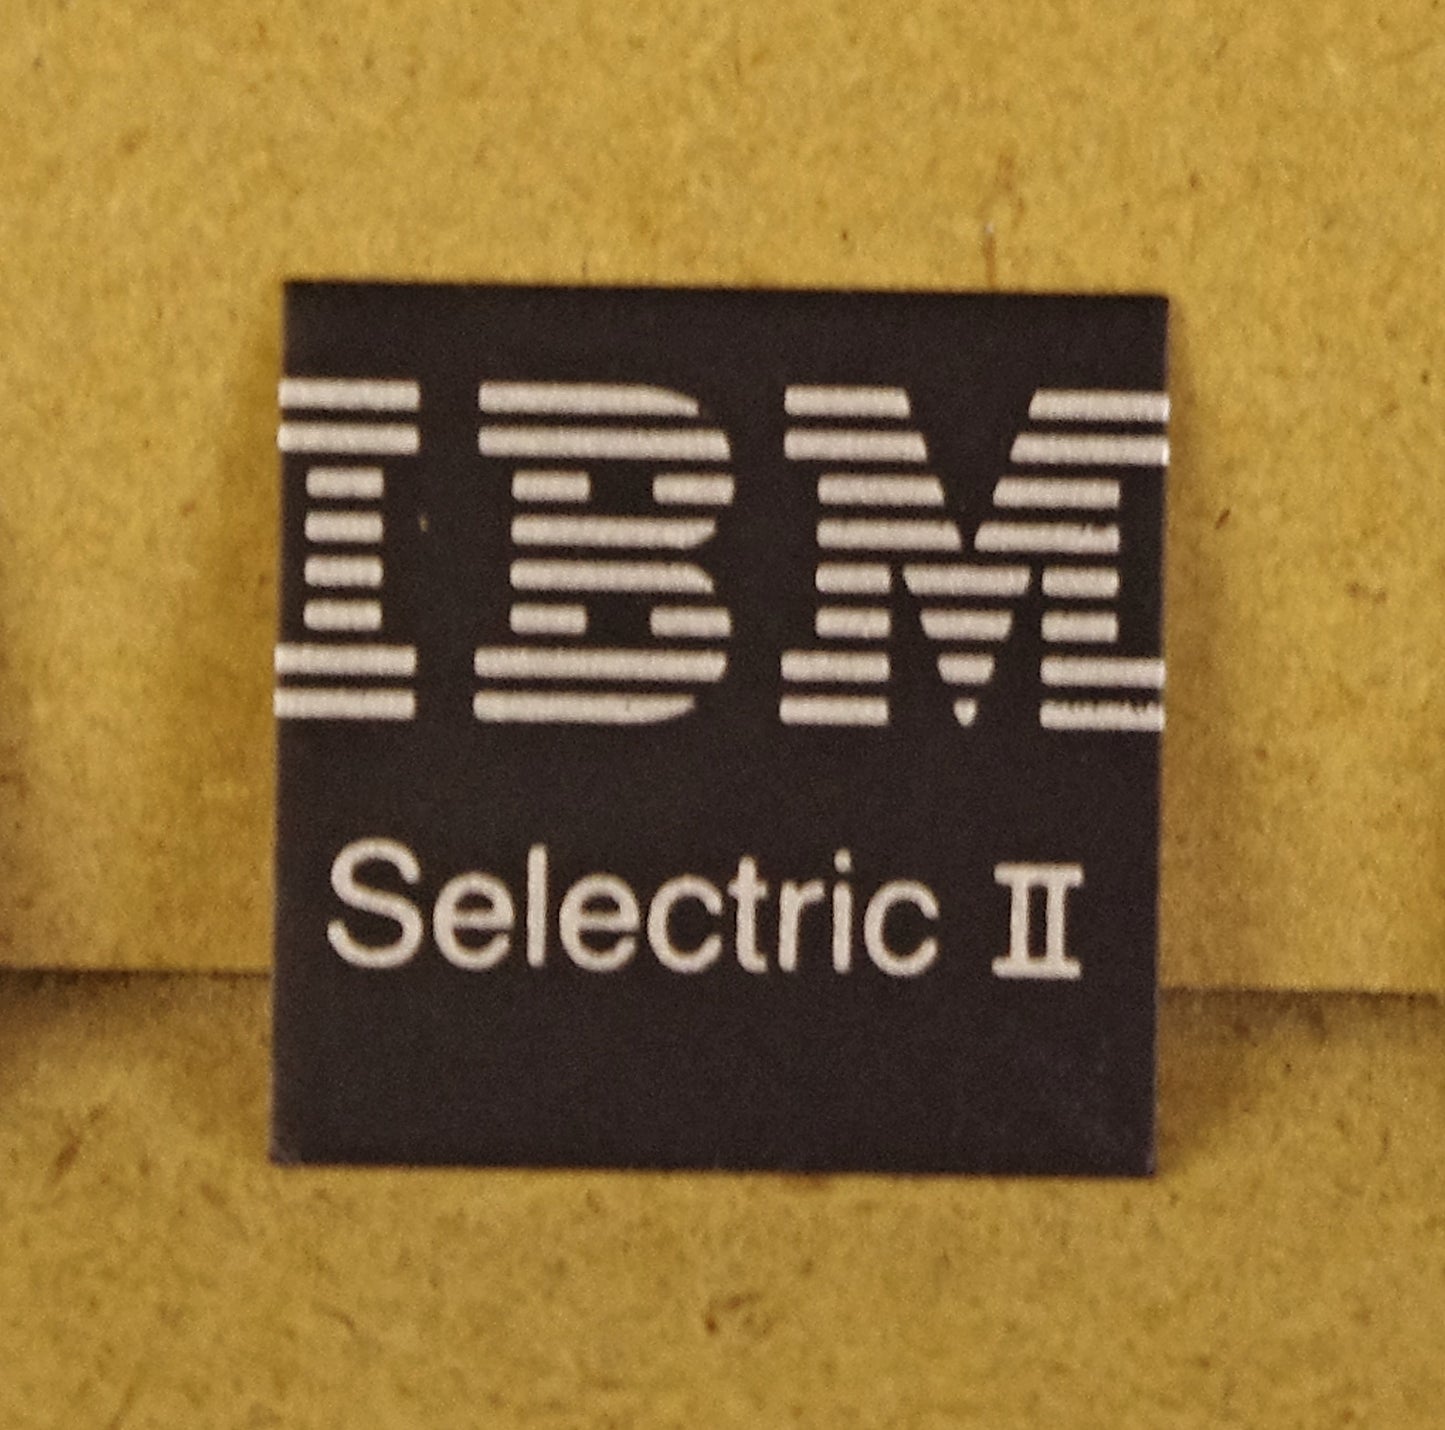 1 each New typewriter cover label for a IBM Selectric II